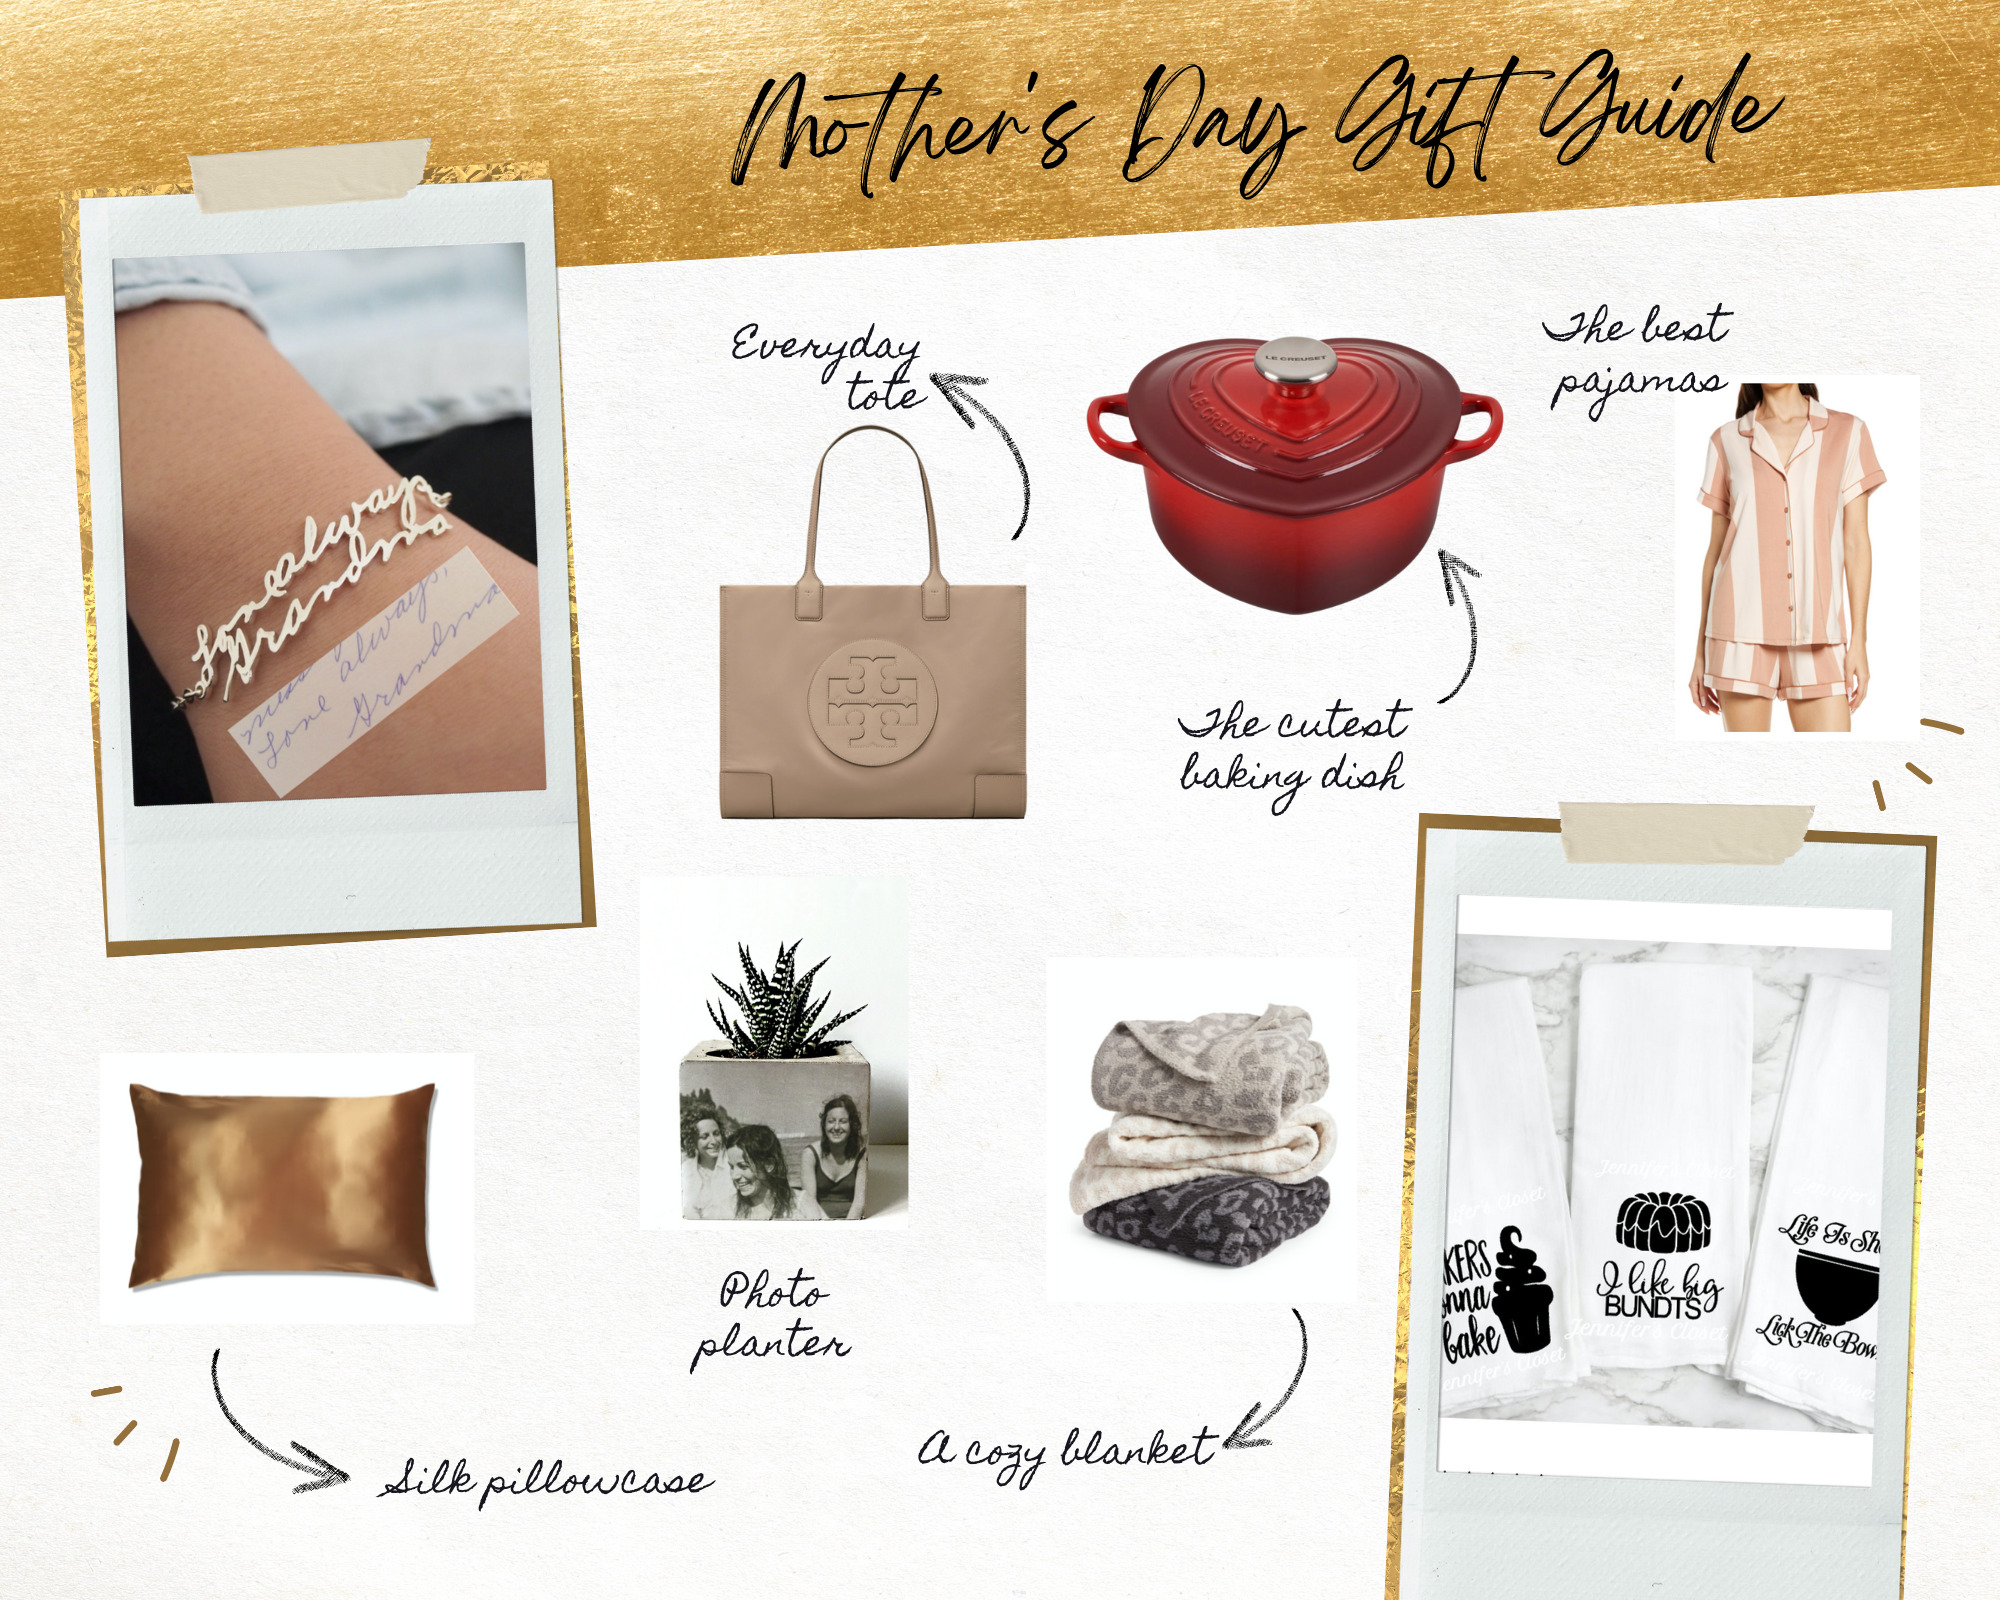 2023 Mother's Day Gifts: My Favorite Picks